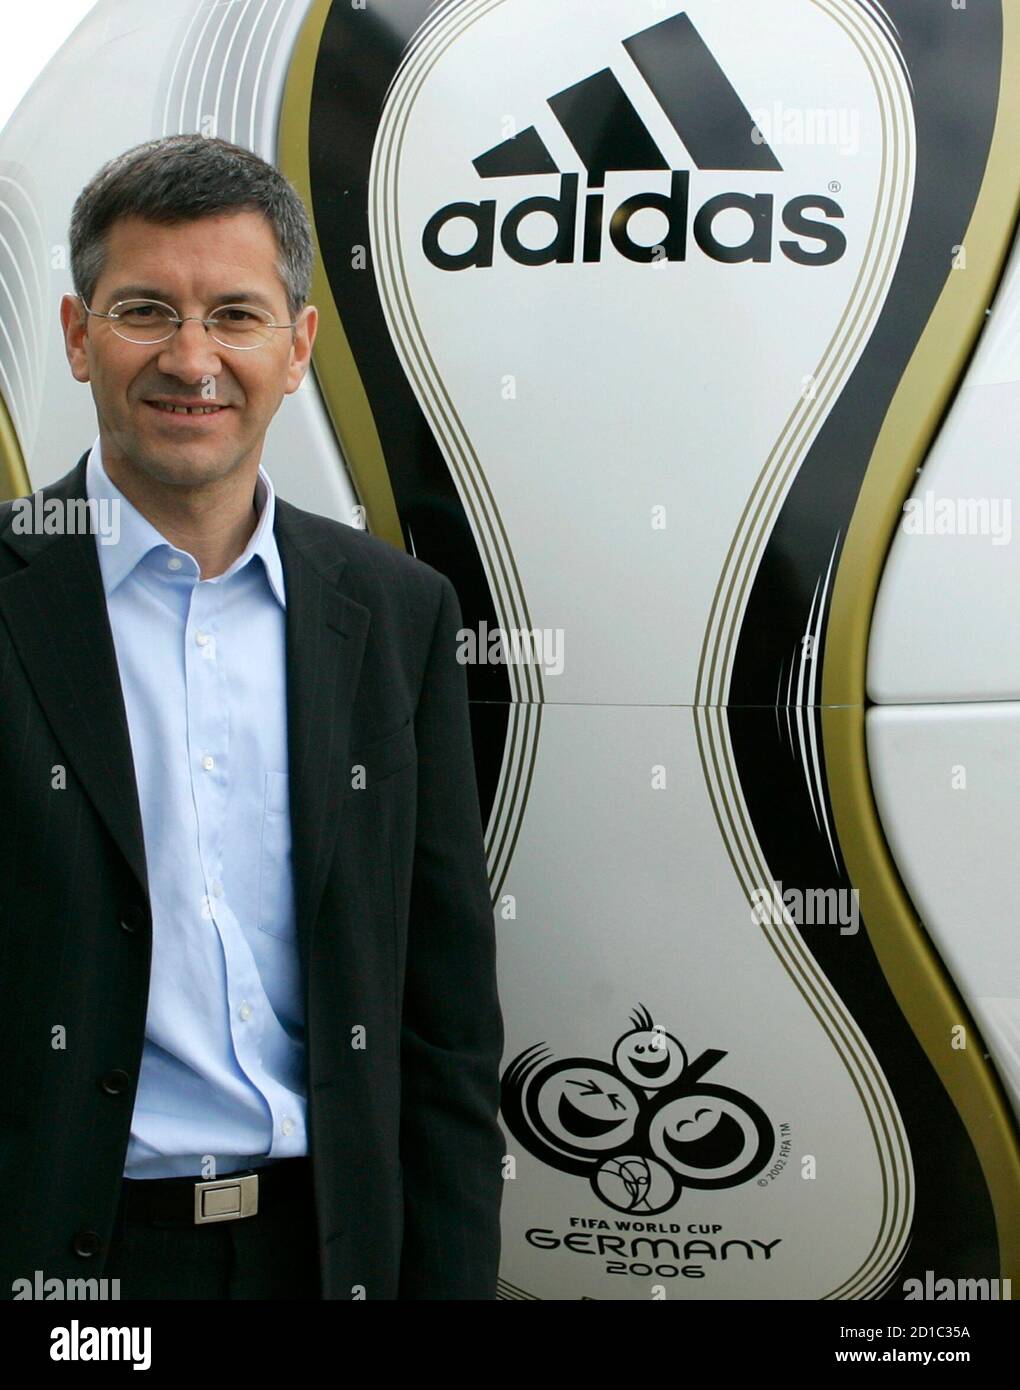 Herbert Hainer, CEO of the world's second-largest sports goods maker Adidas- Salomon AG arrives for the annual news conference in Herzogenaurach near  Nuremberg March 2, 2006. Adidas reported on Thursday a net loss